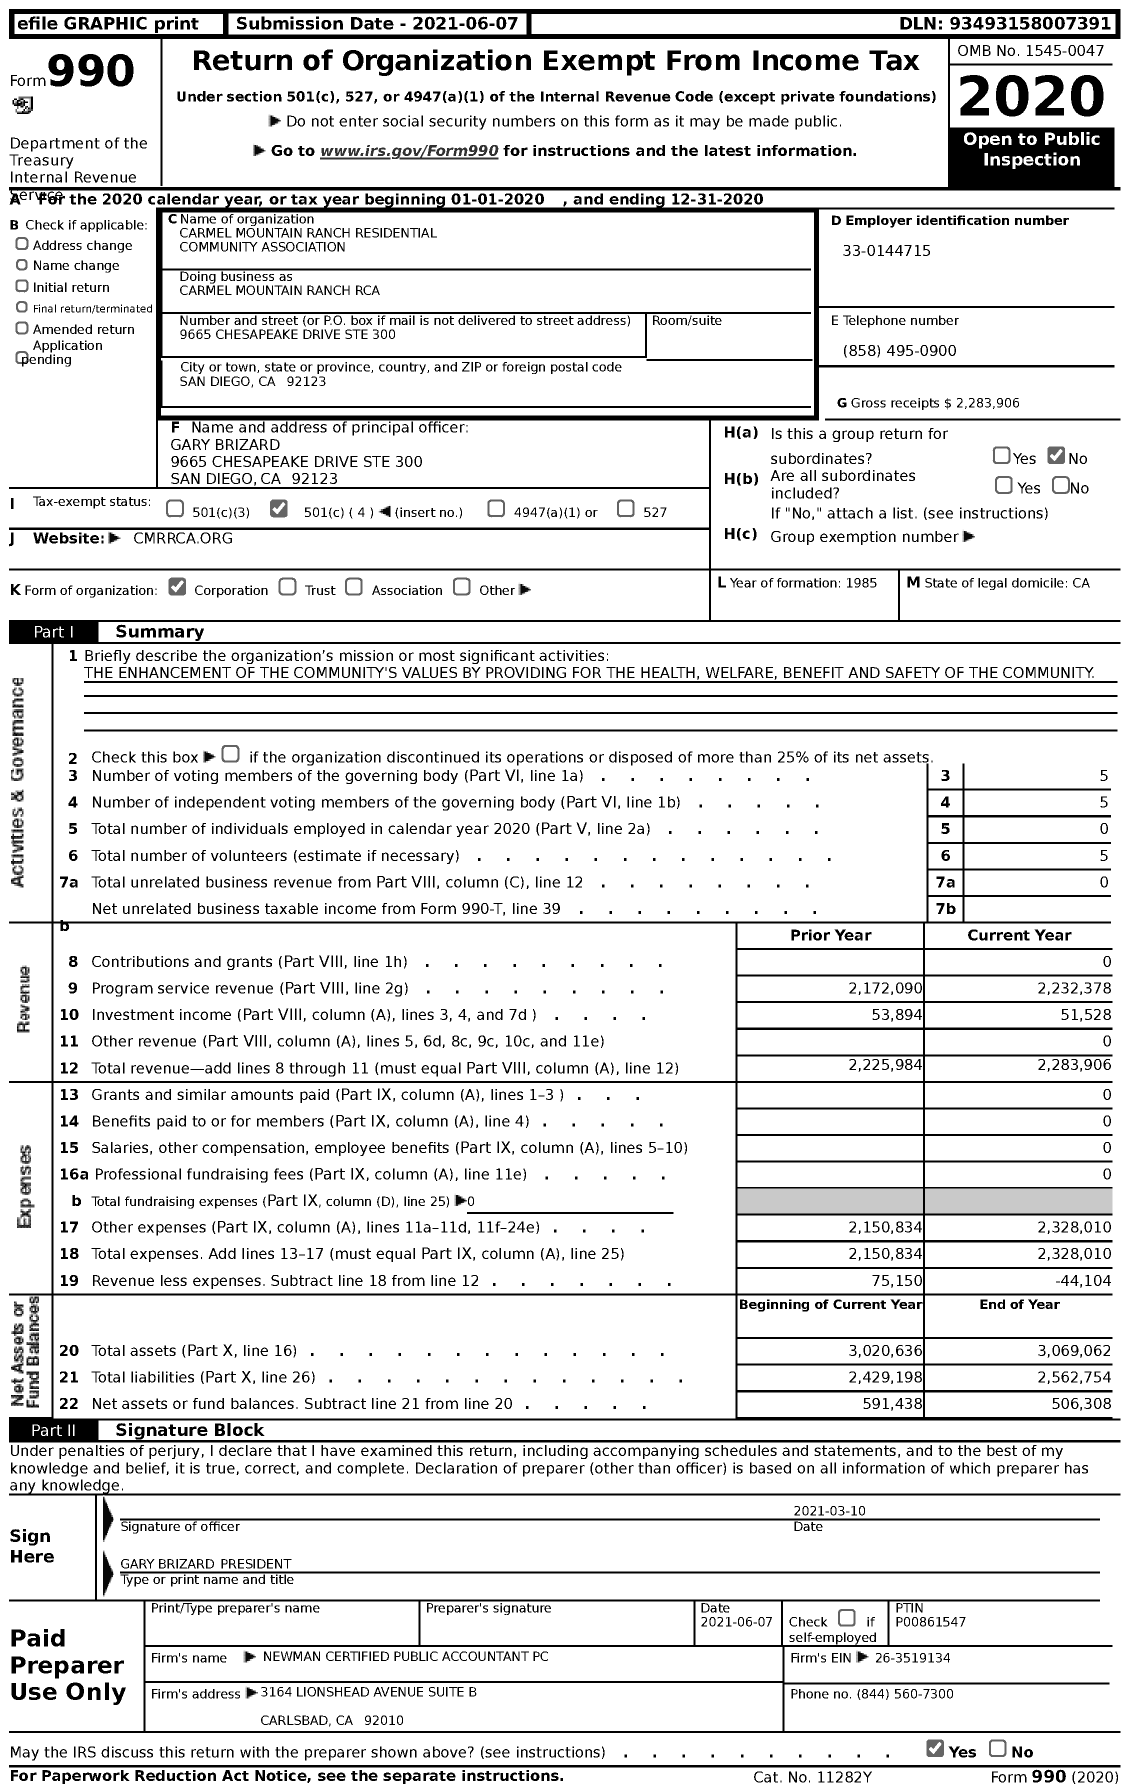 Image of first page of 2020 Form 990 for Carmel Mountain Ranch Residential Community Association